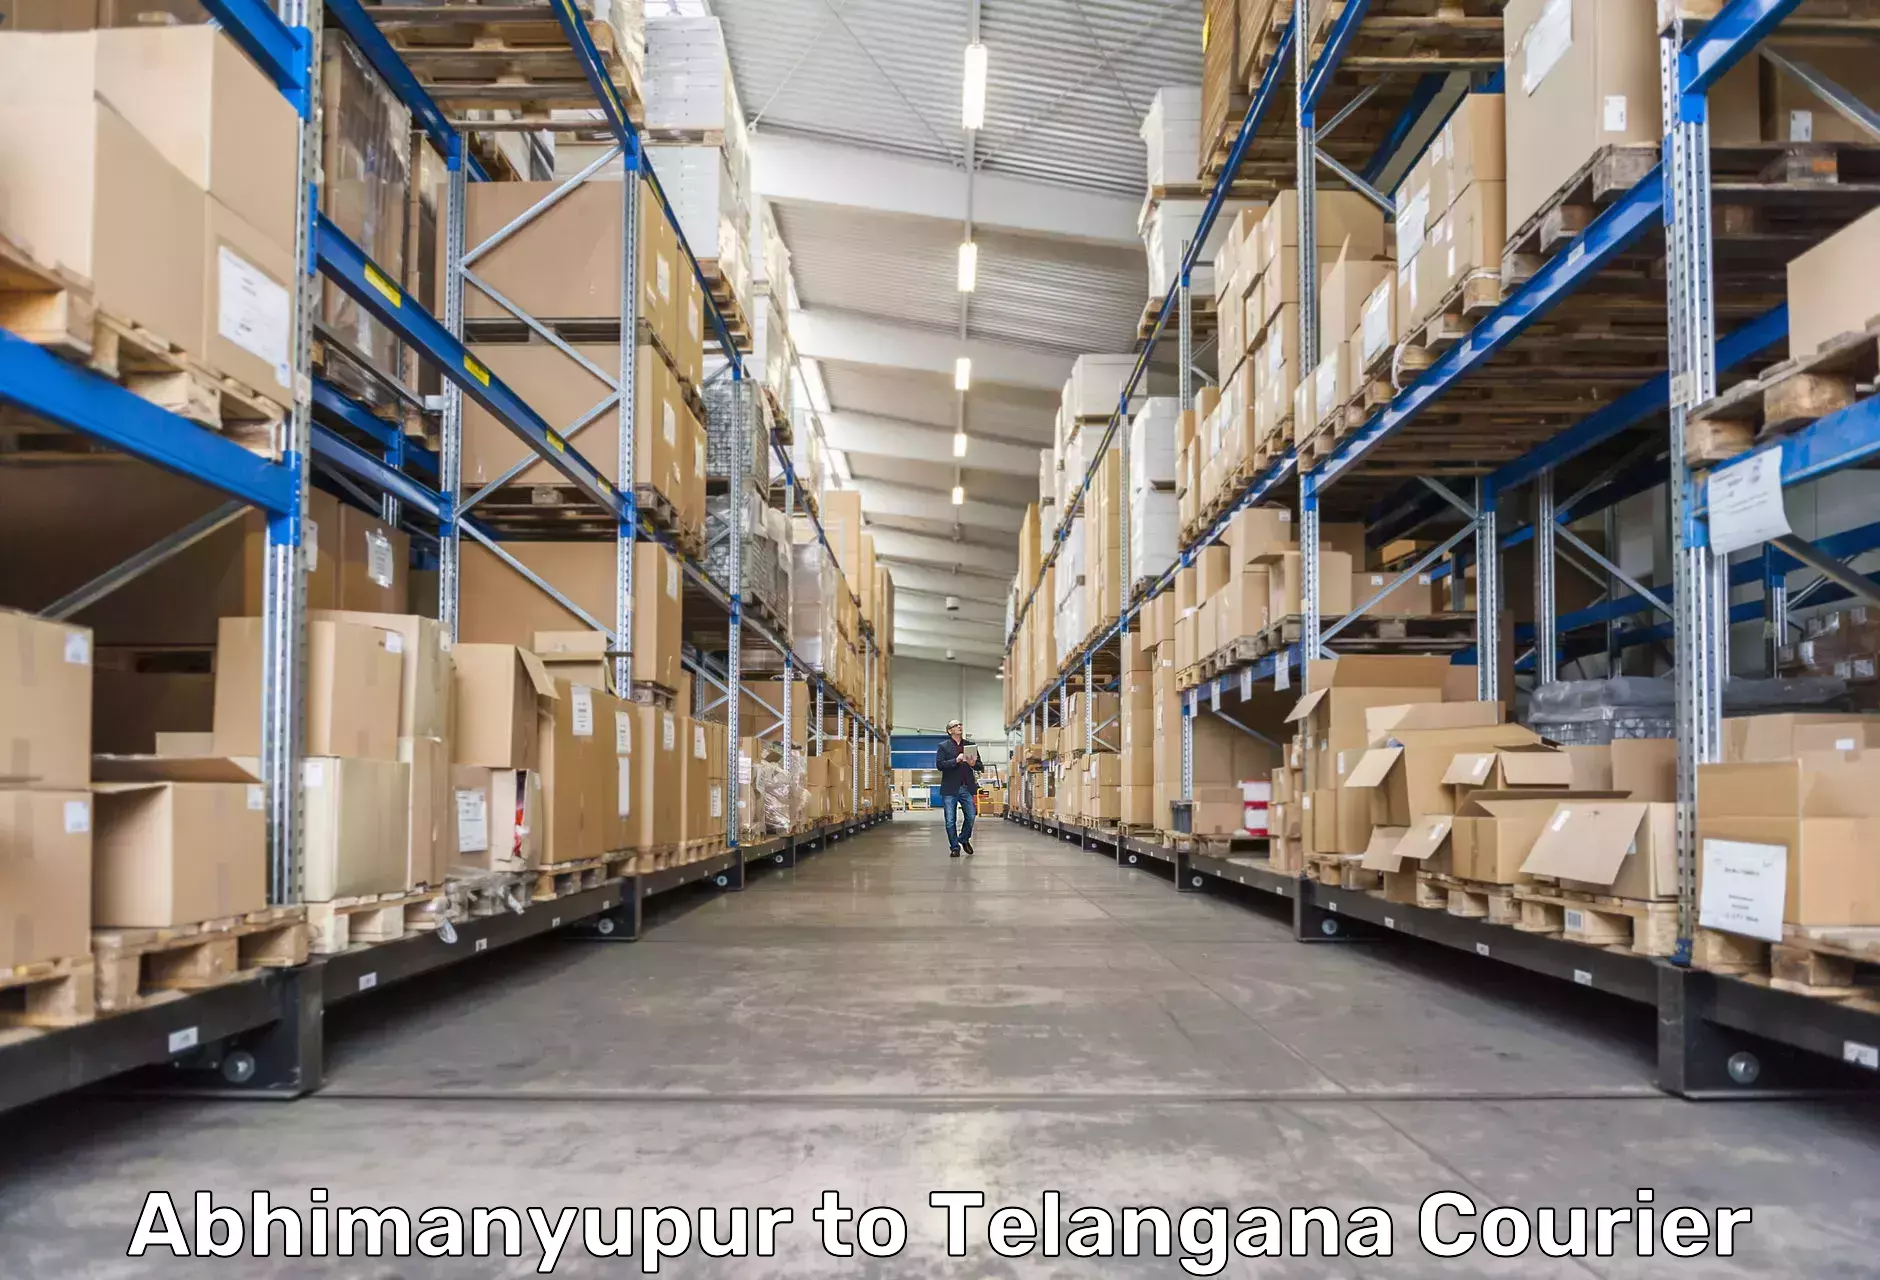 Customer-centric shipping Abhimanyupur to Amangal